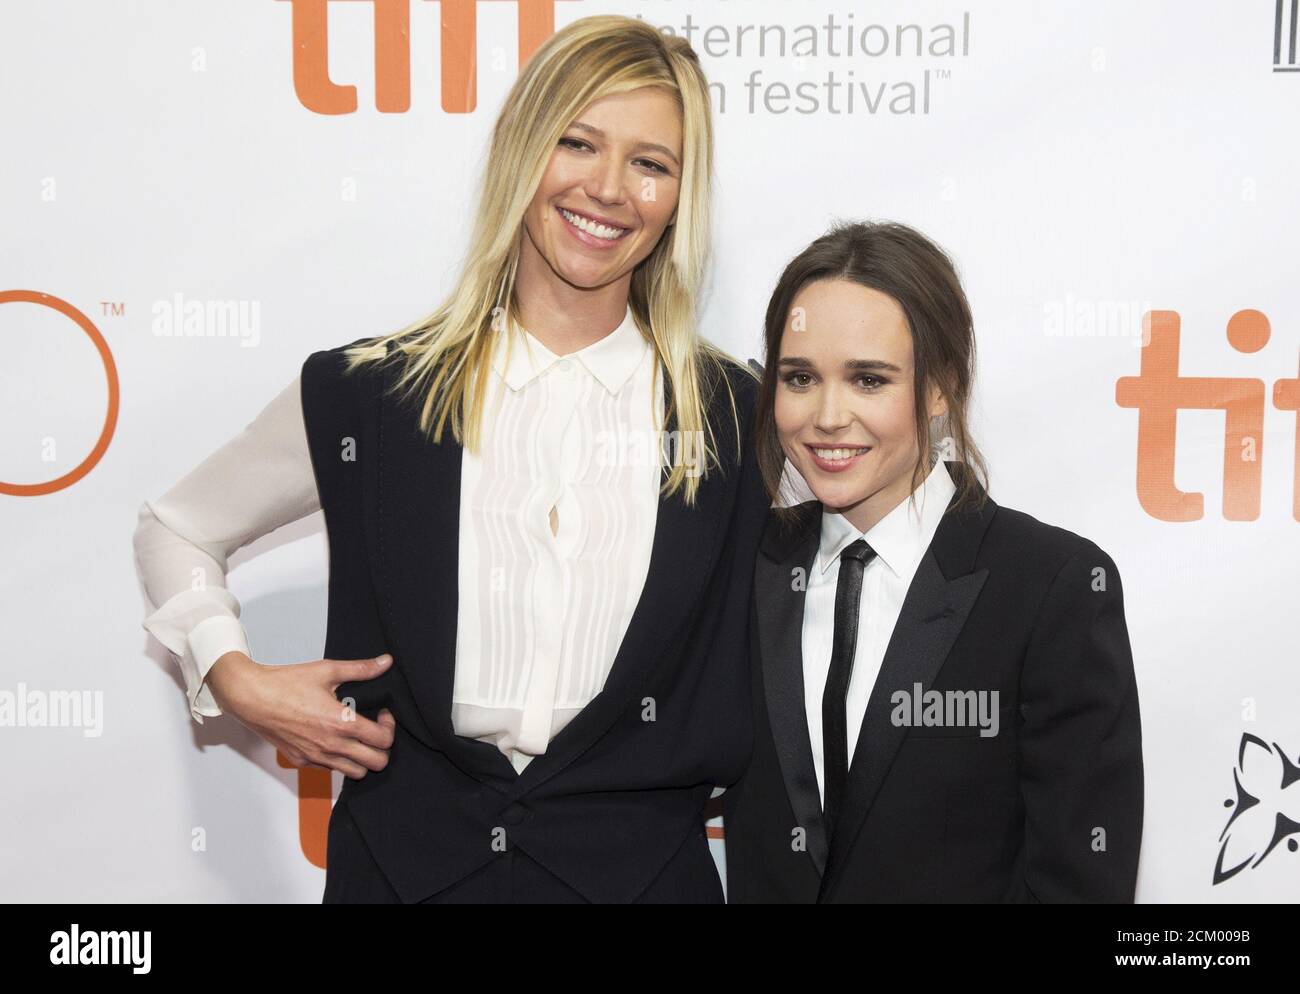 Actress Ellen Page arrives with her girlfriend, Samantha Thomas (L), on the red carpet for the film 'Freeheld' during the 40th Toronto International Film Festival in Toronto, Canada, September 13, 2015. TIFF runs from September 10-20. REUTERS/Mark Blinch Stock Photo